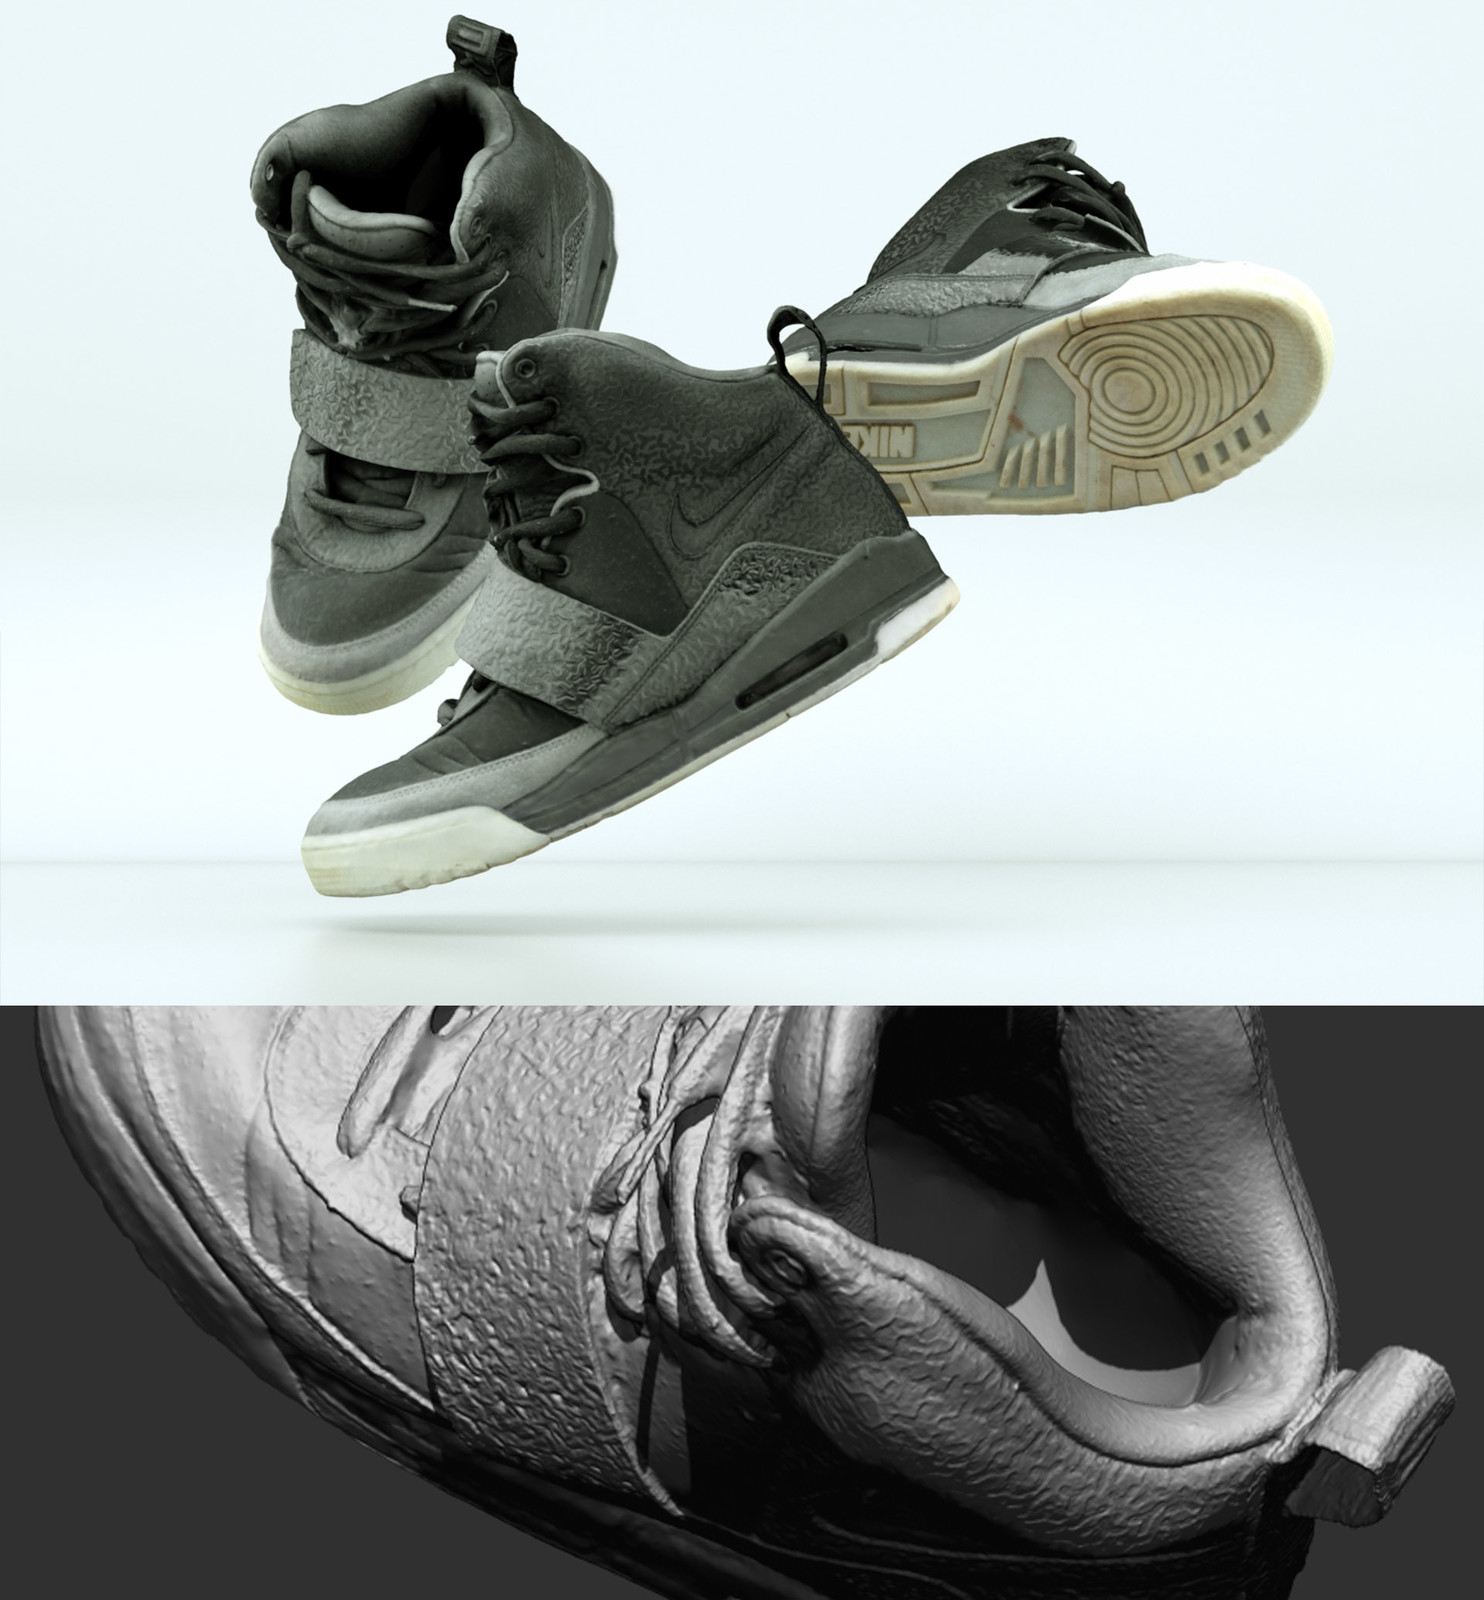 Sneaker scan, quite a lot of detail reconstructed. Learn how to shoot sneakers in my tutorial as well. Available via this link &gt; Download via this link &gt; https://gum.co/UdyLk